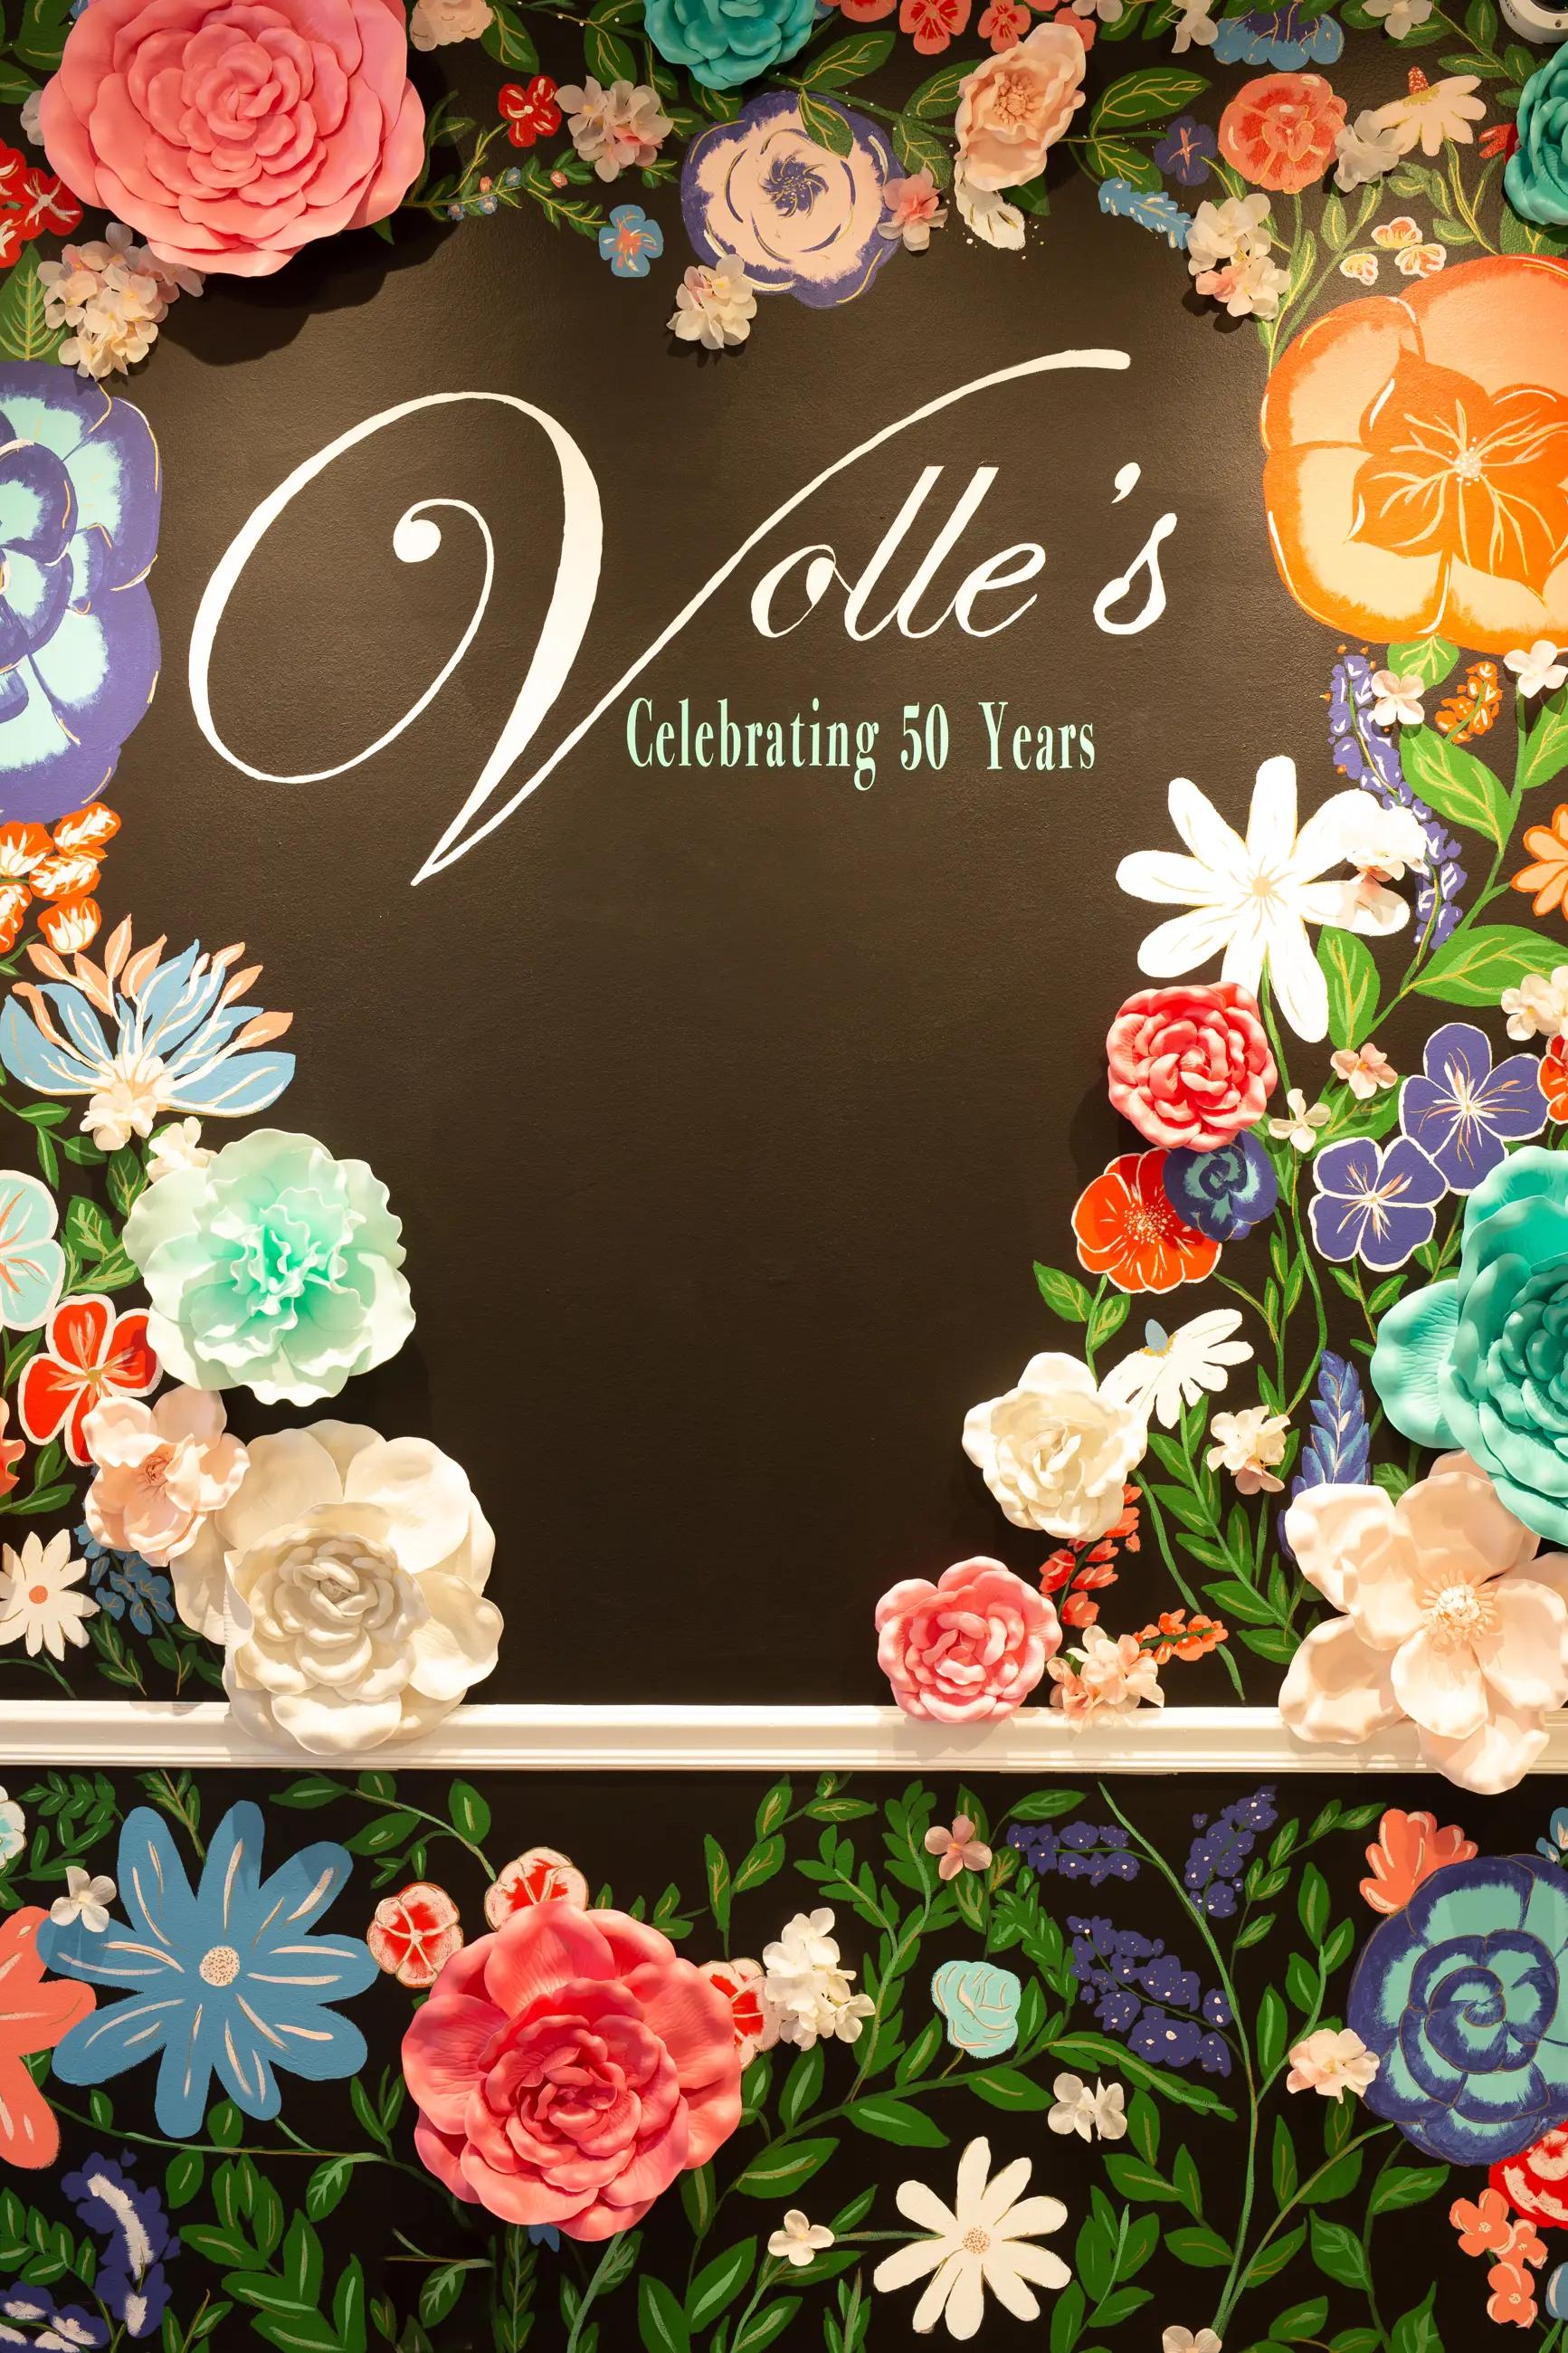 Volle's Bridal sign